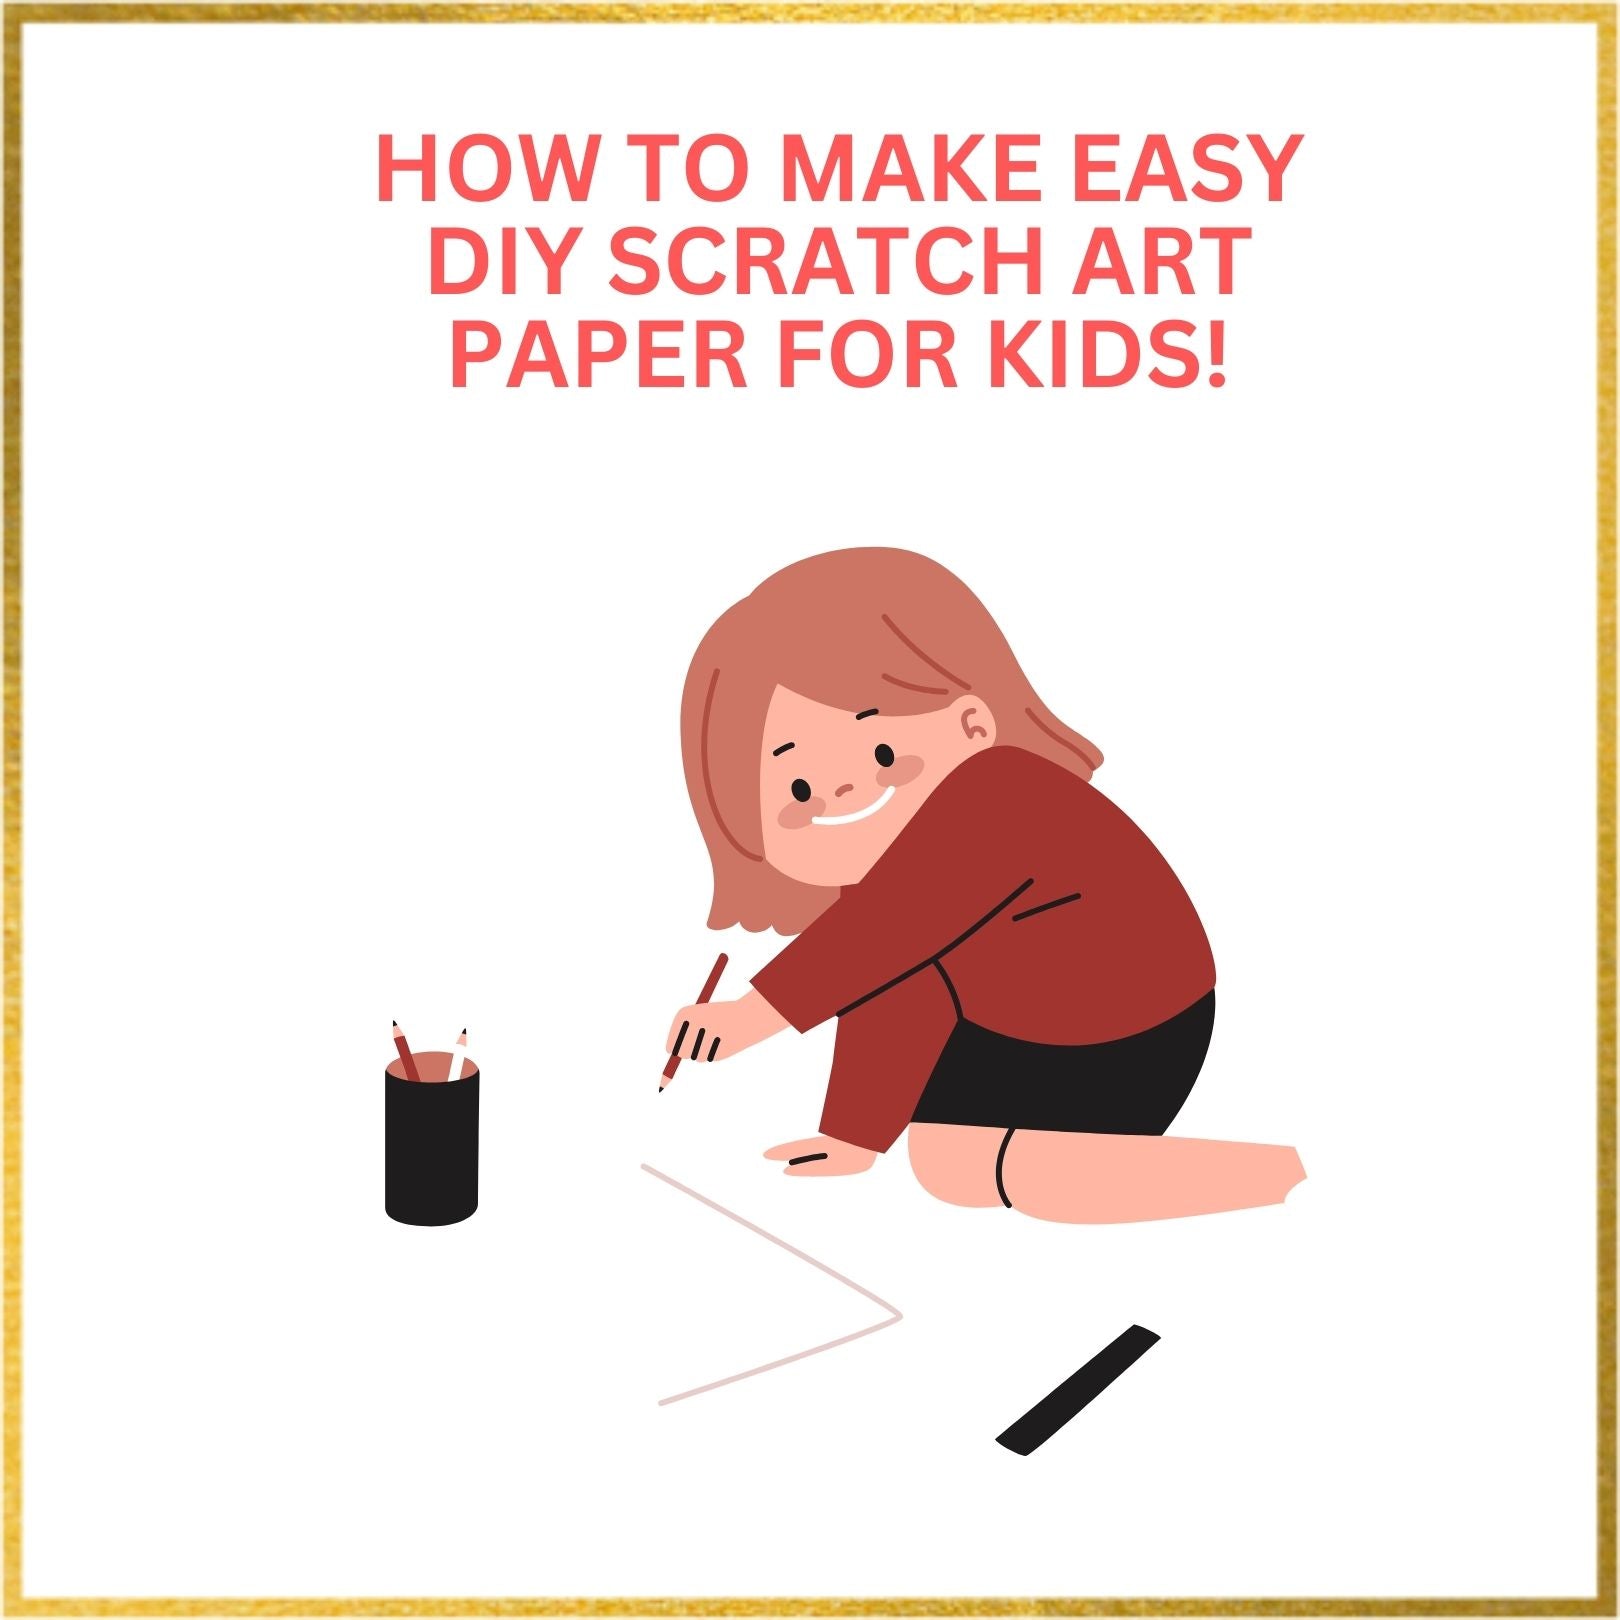 How to Make Easy DIY Scratch Art Paper for Kids! – Awesome Place For Kids